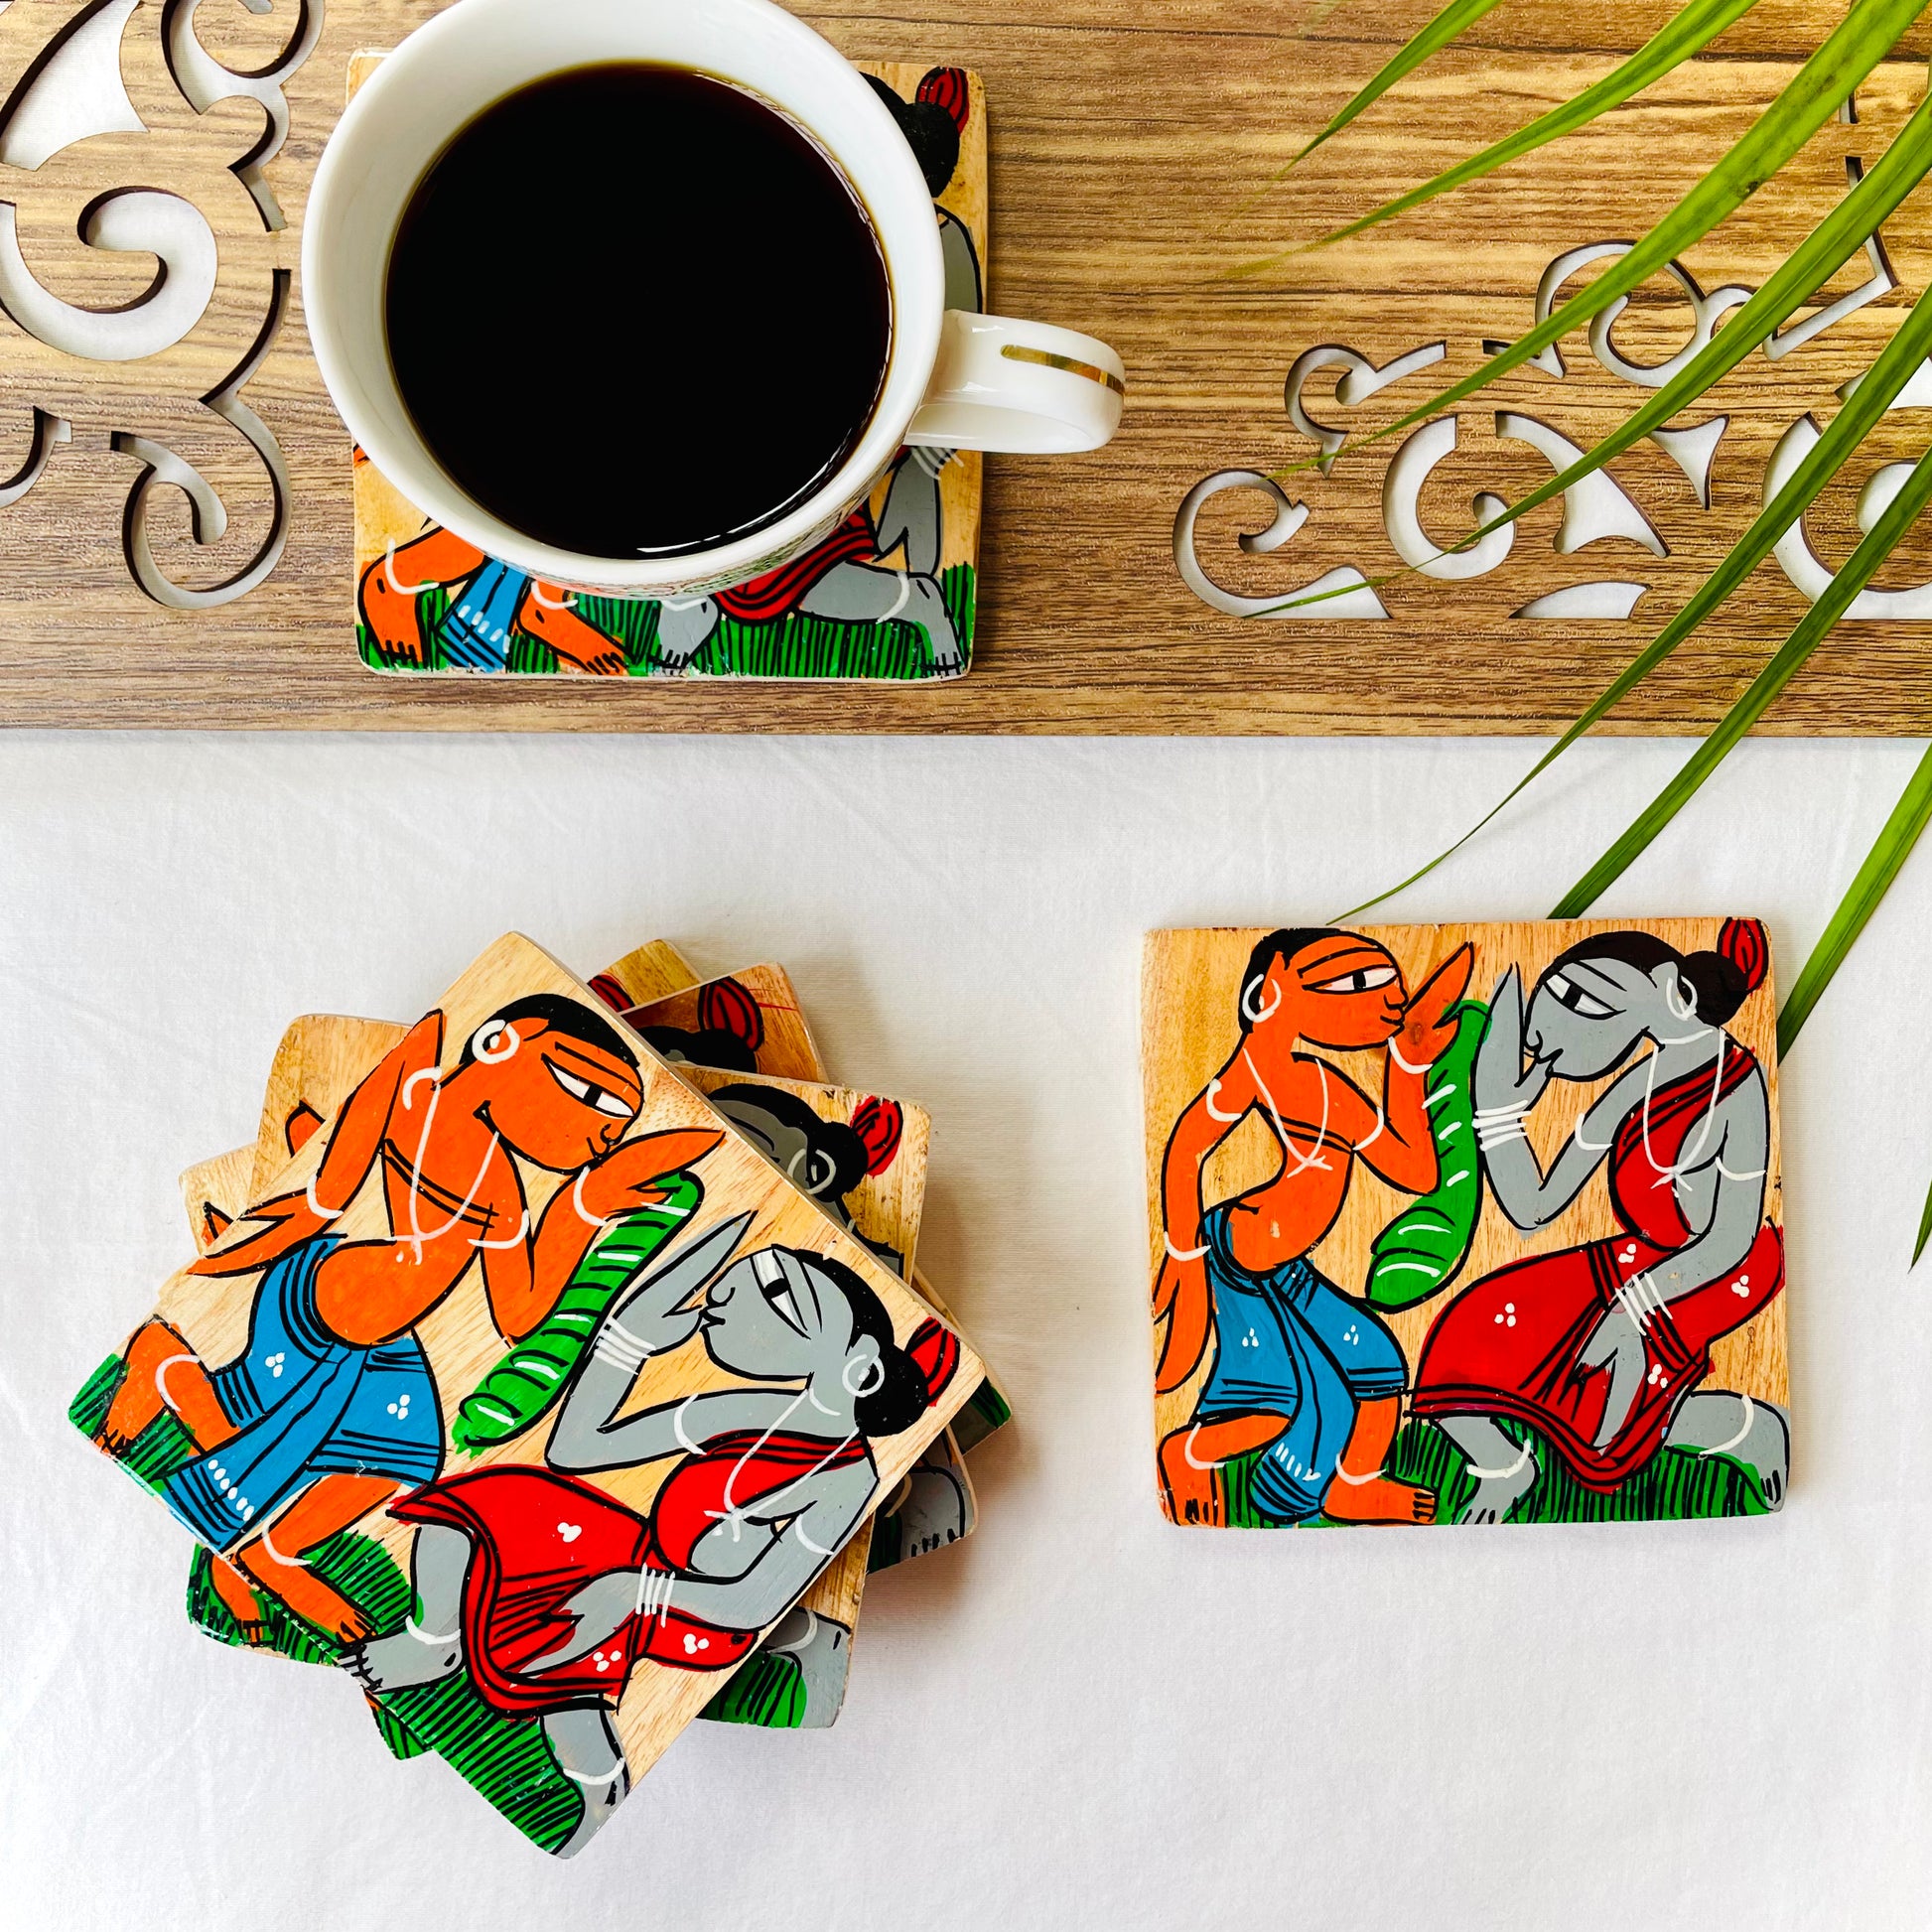 Five pure mango wood square wood coasters painted with tribal characters dancing are placed near a teacup on top of a wood coaster filled with black tea with leaves in the background